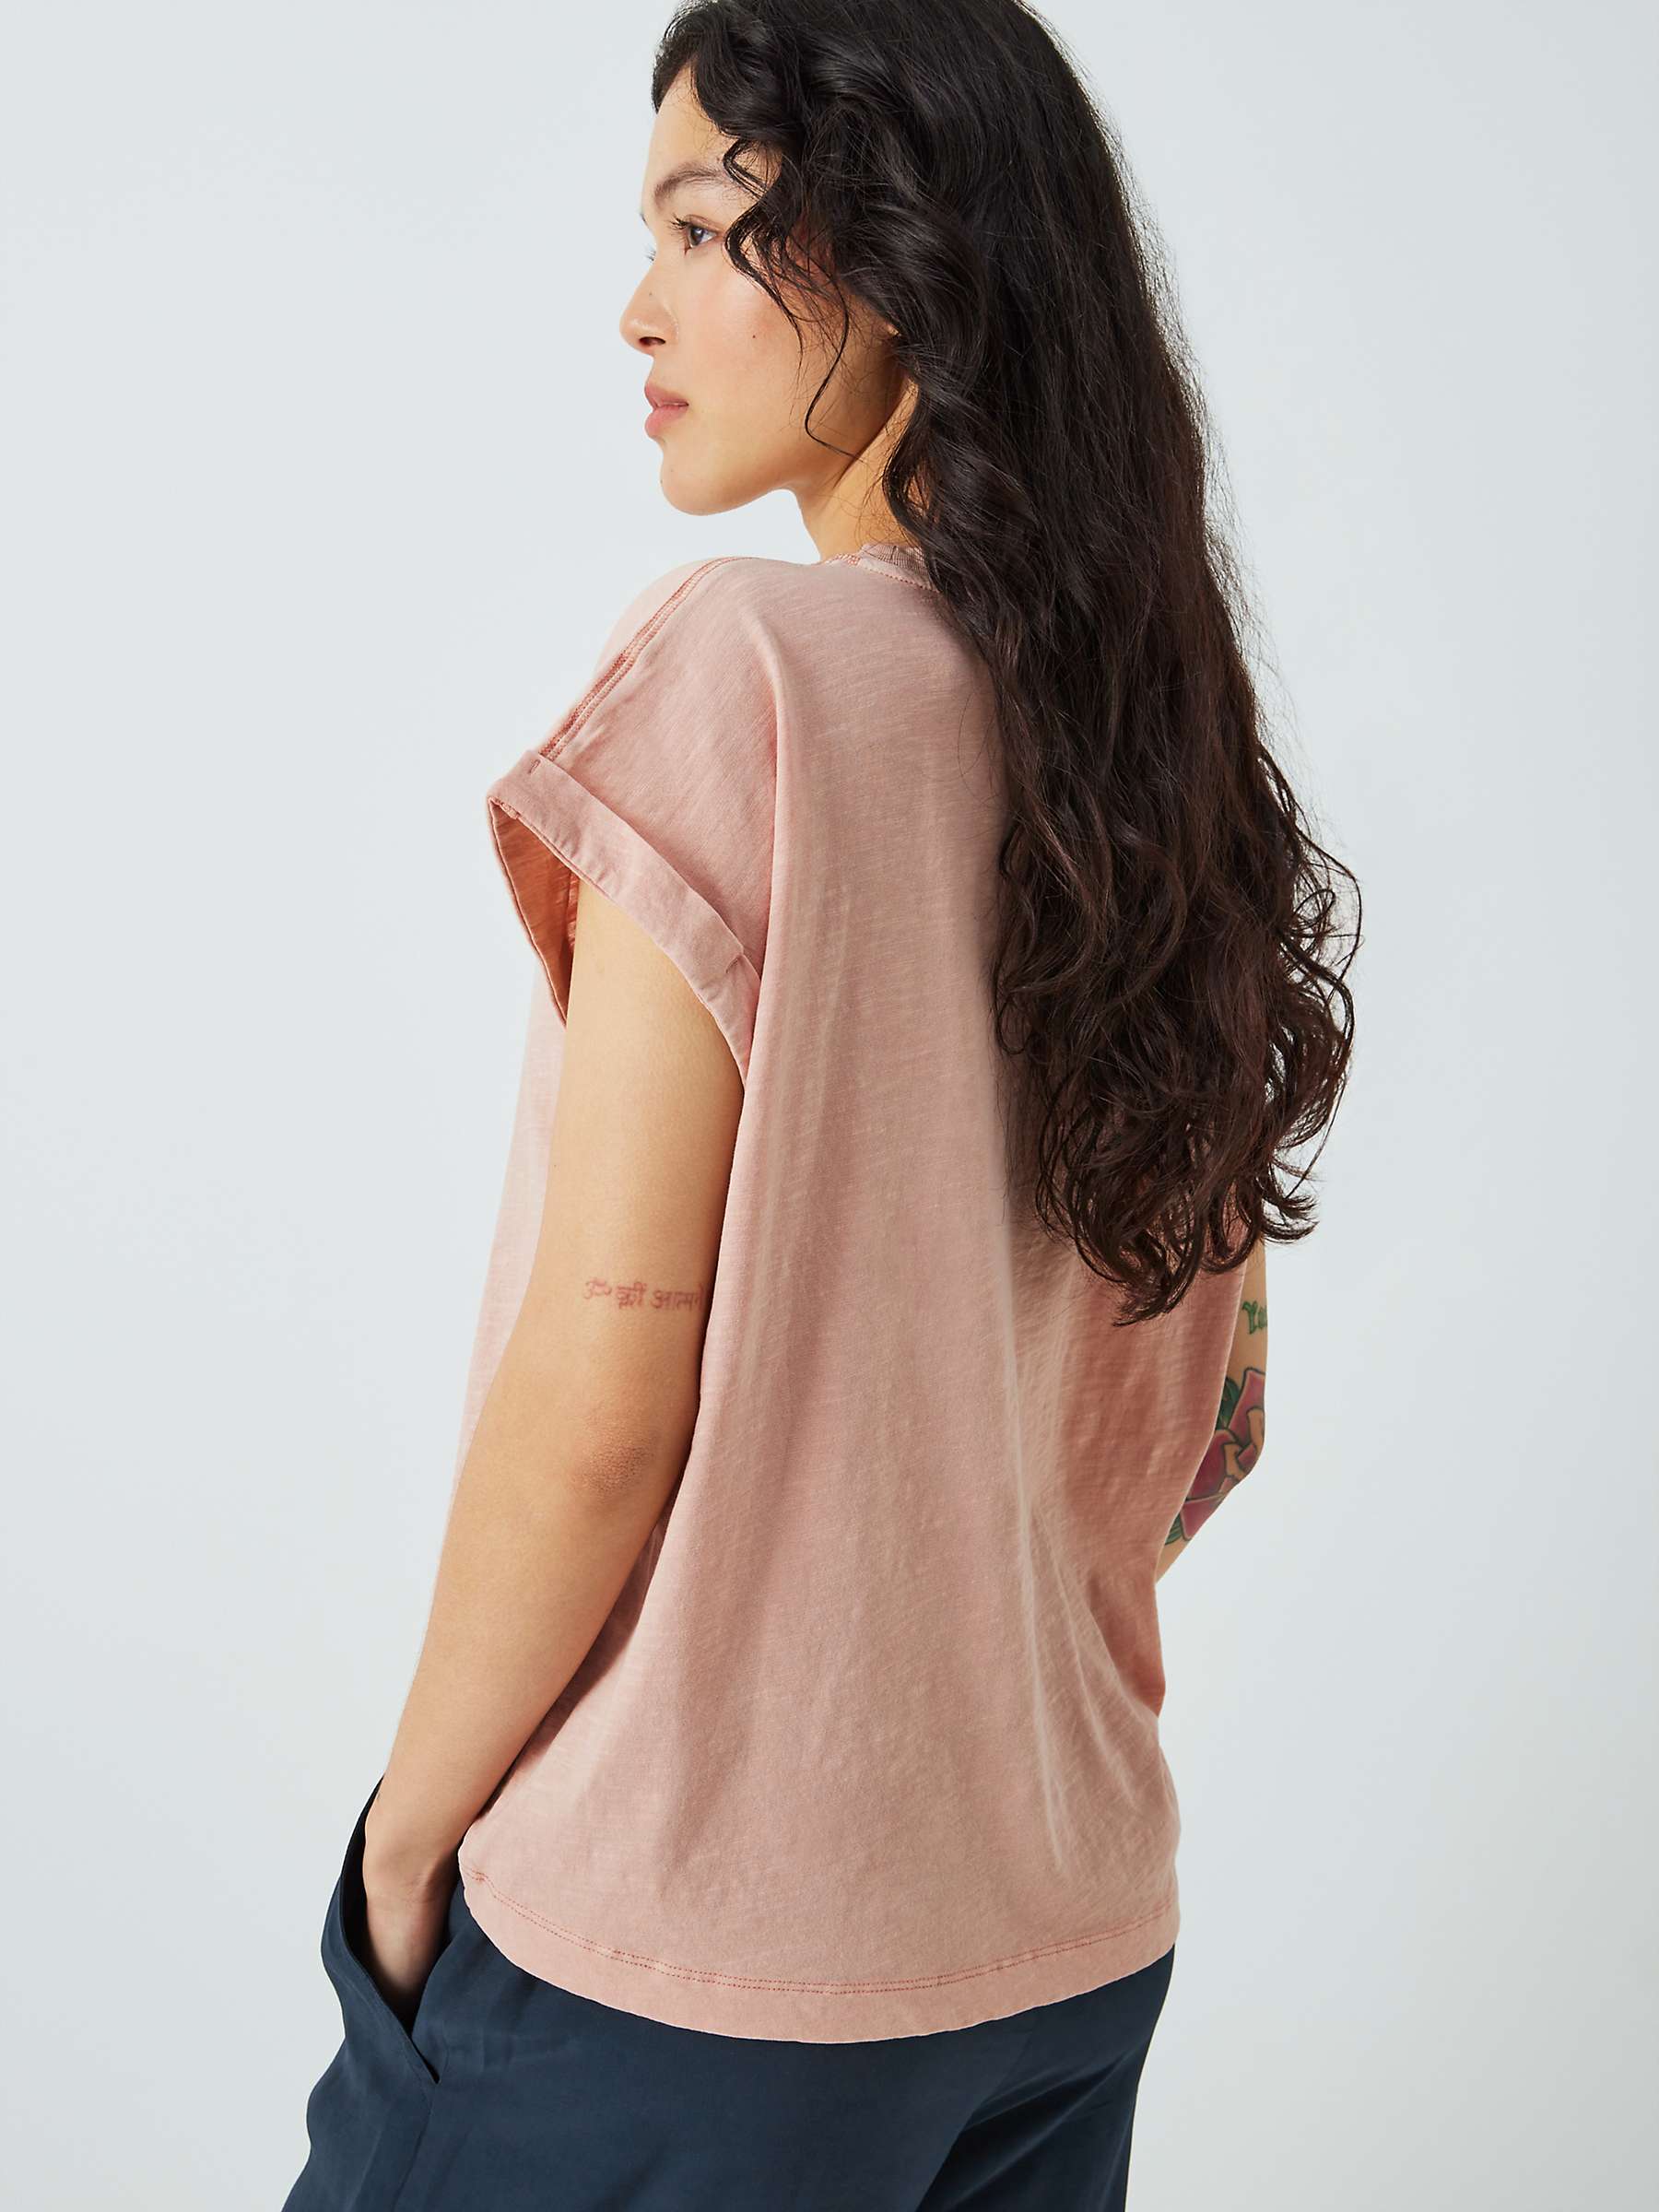 Buy AND/OR Garment Dyed Stitch Tank T-Shirt Online at johnlewis.com